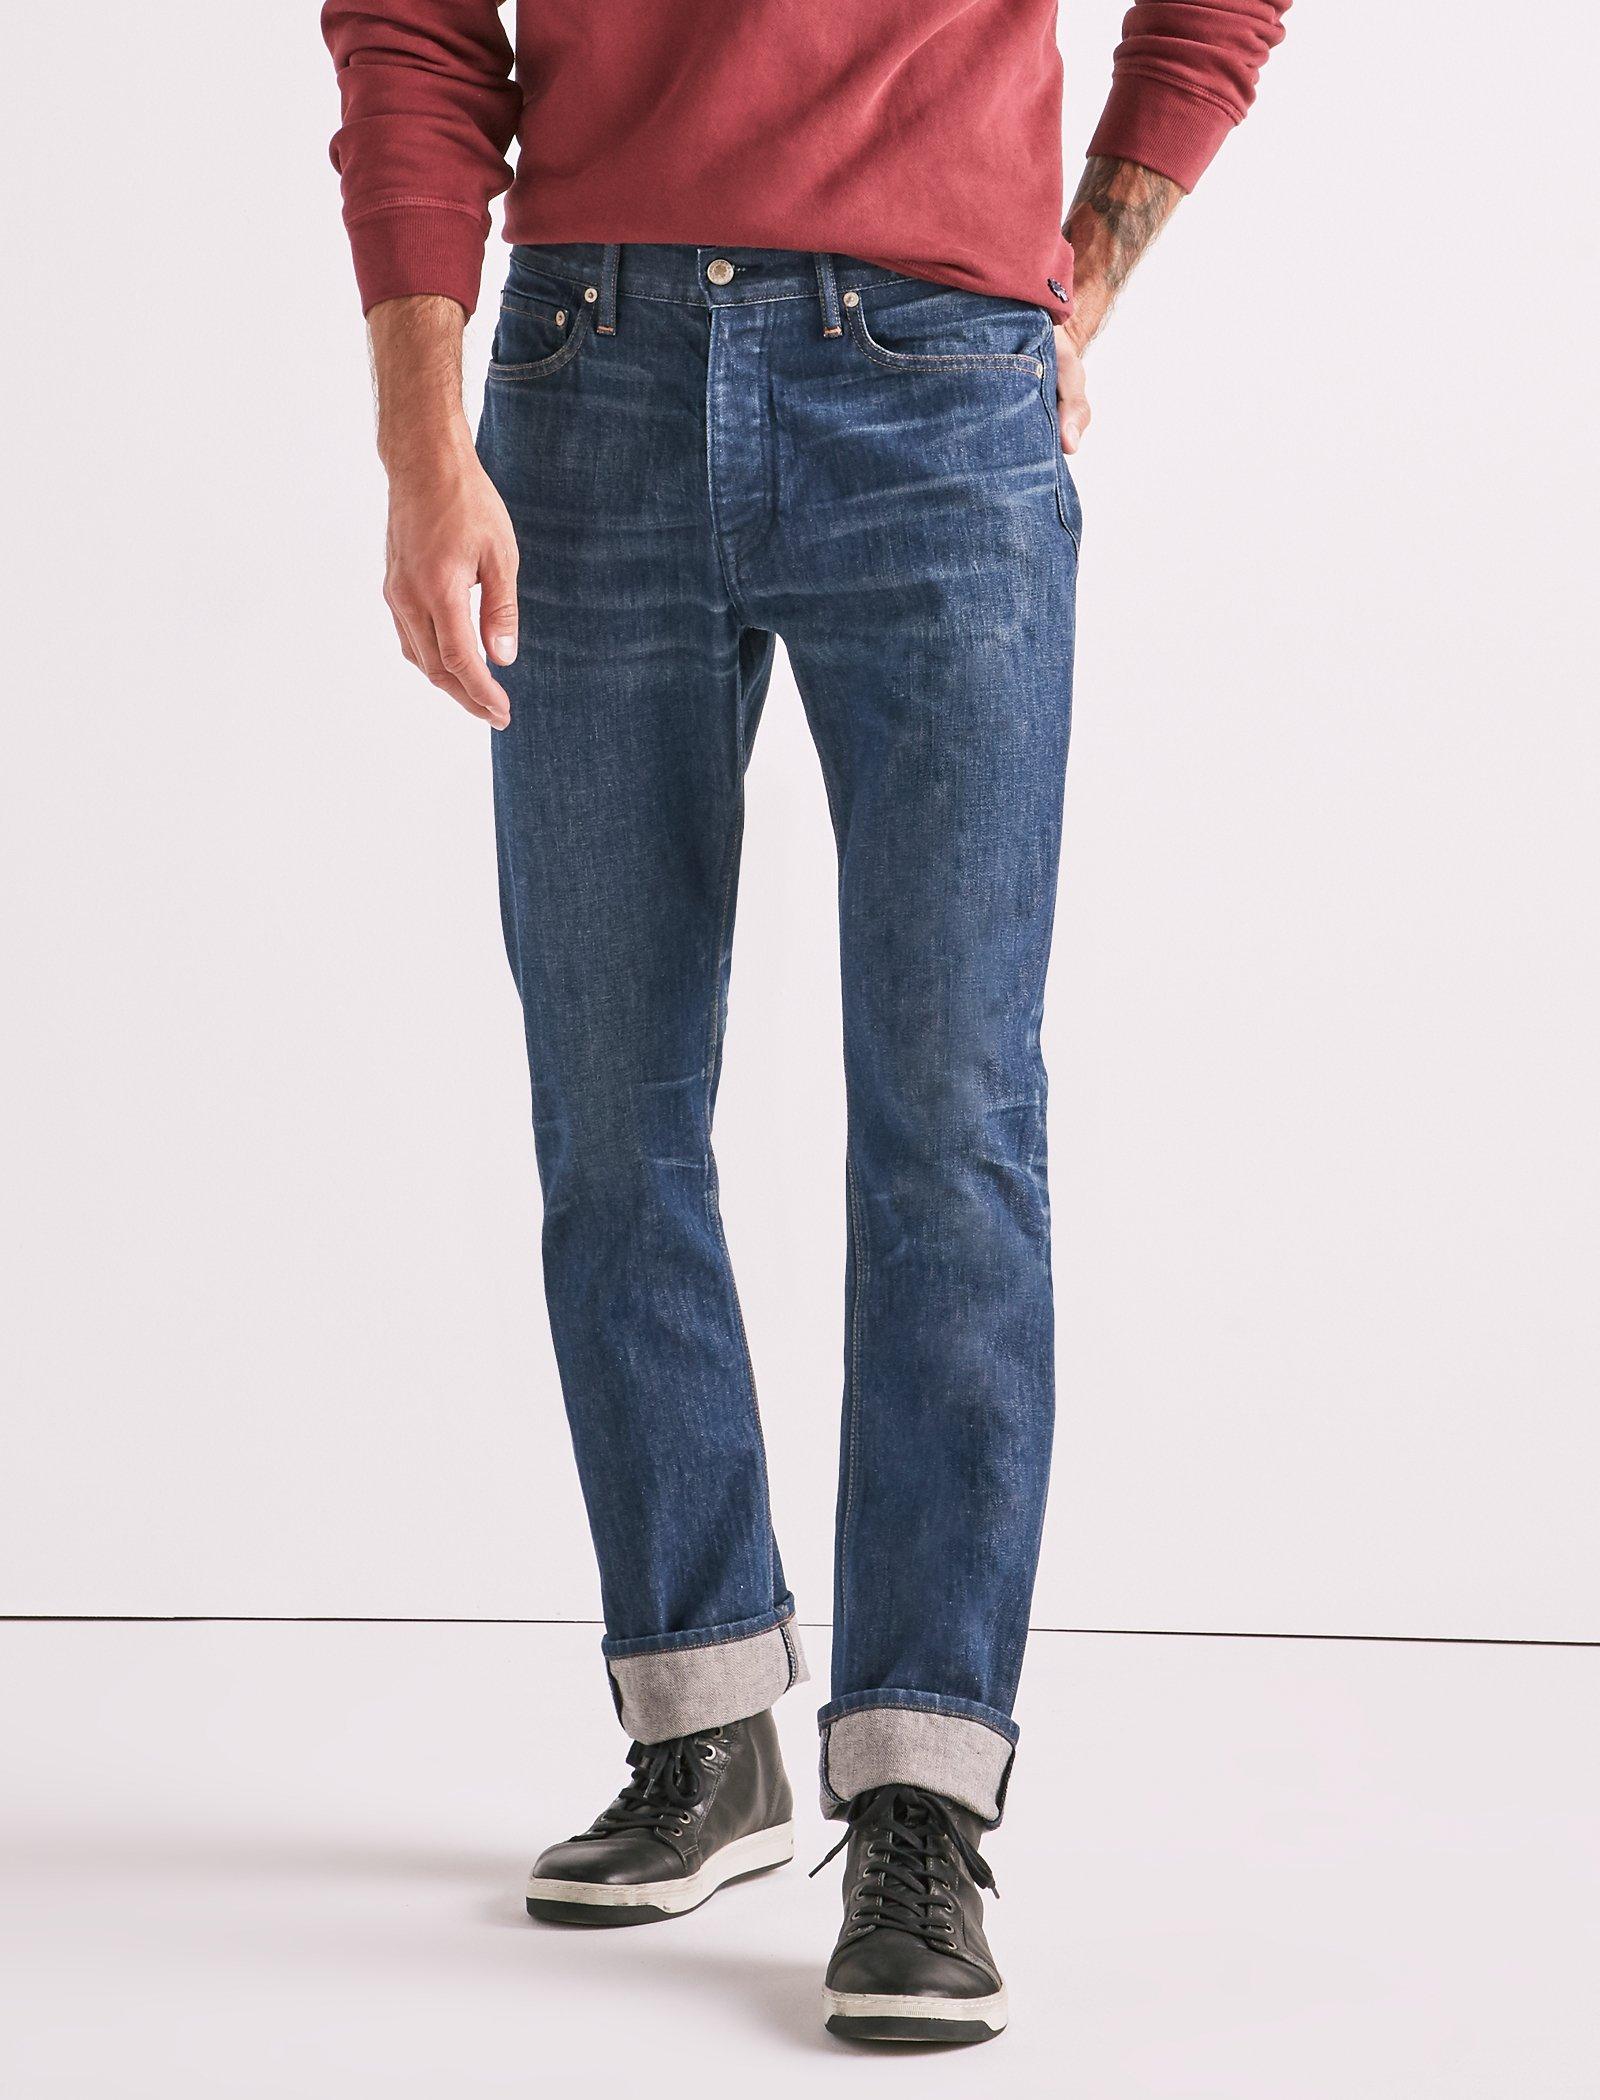 MADE IN L.A. 410 ATHLETIC SLIM JEAN | Lucky Brand